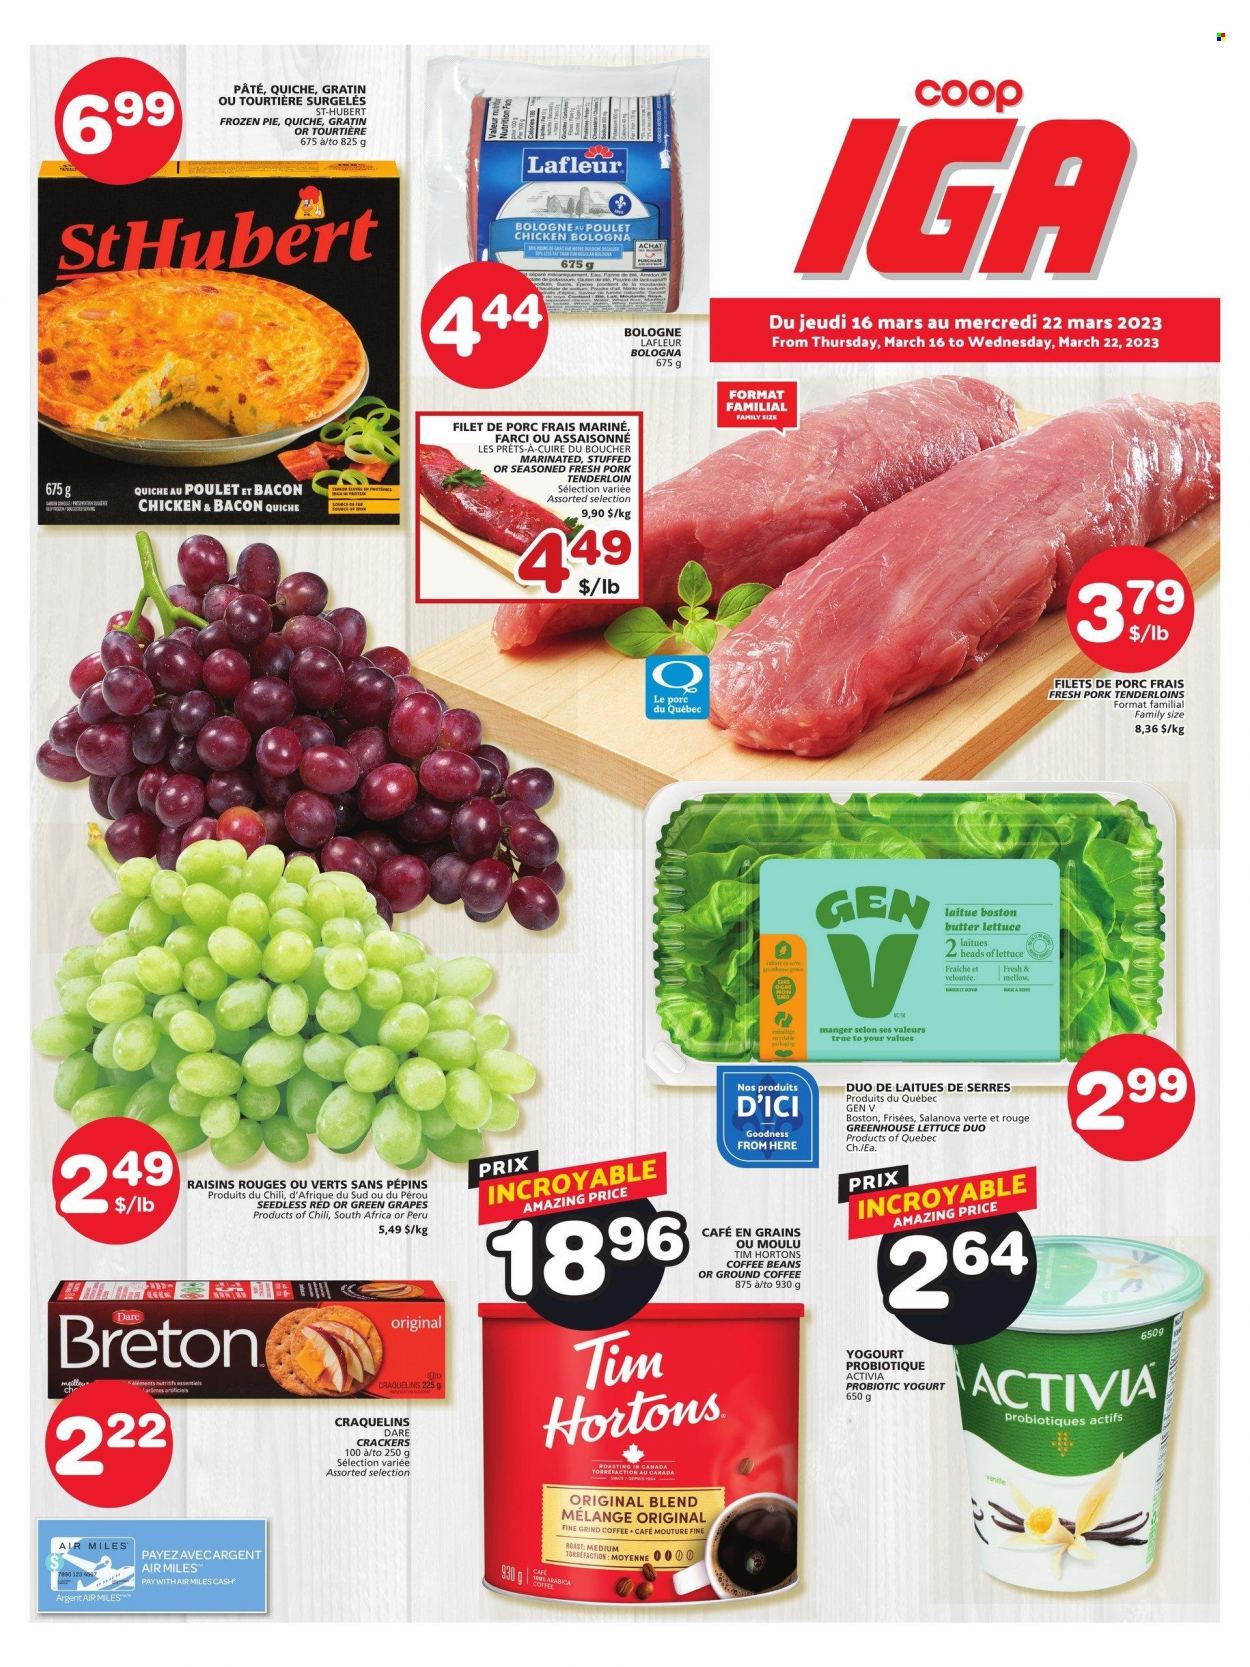 thumbnail - IGA Flyer - March 16, 2023 - March 22, 2023 - Sales products - pie, butter lettuce, lettuce, grapes, roast, bacon, bologna sausage, yoghurt, probiotic yoghurt, Activia, quiche, Mars, crackers, dried fruit, coffee, coffee beans, ground coffee, pork meat, pork tenderloin, raisins. Page 1.